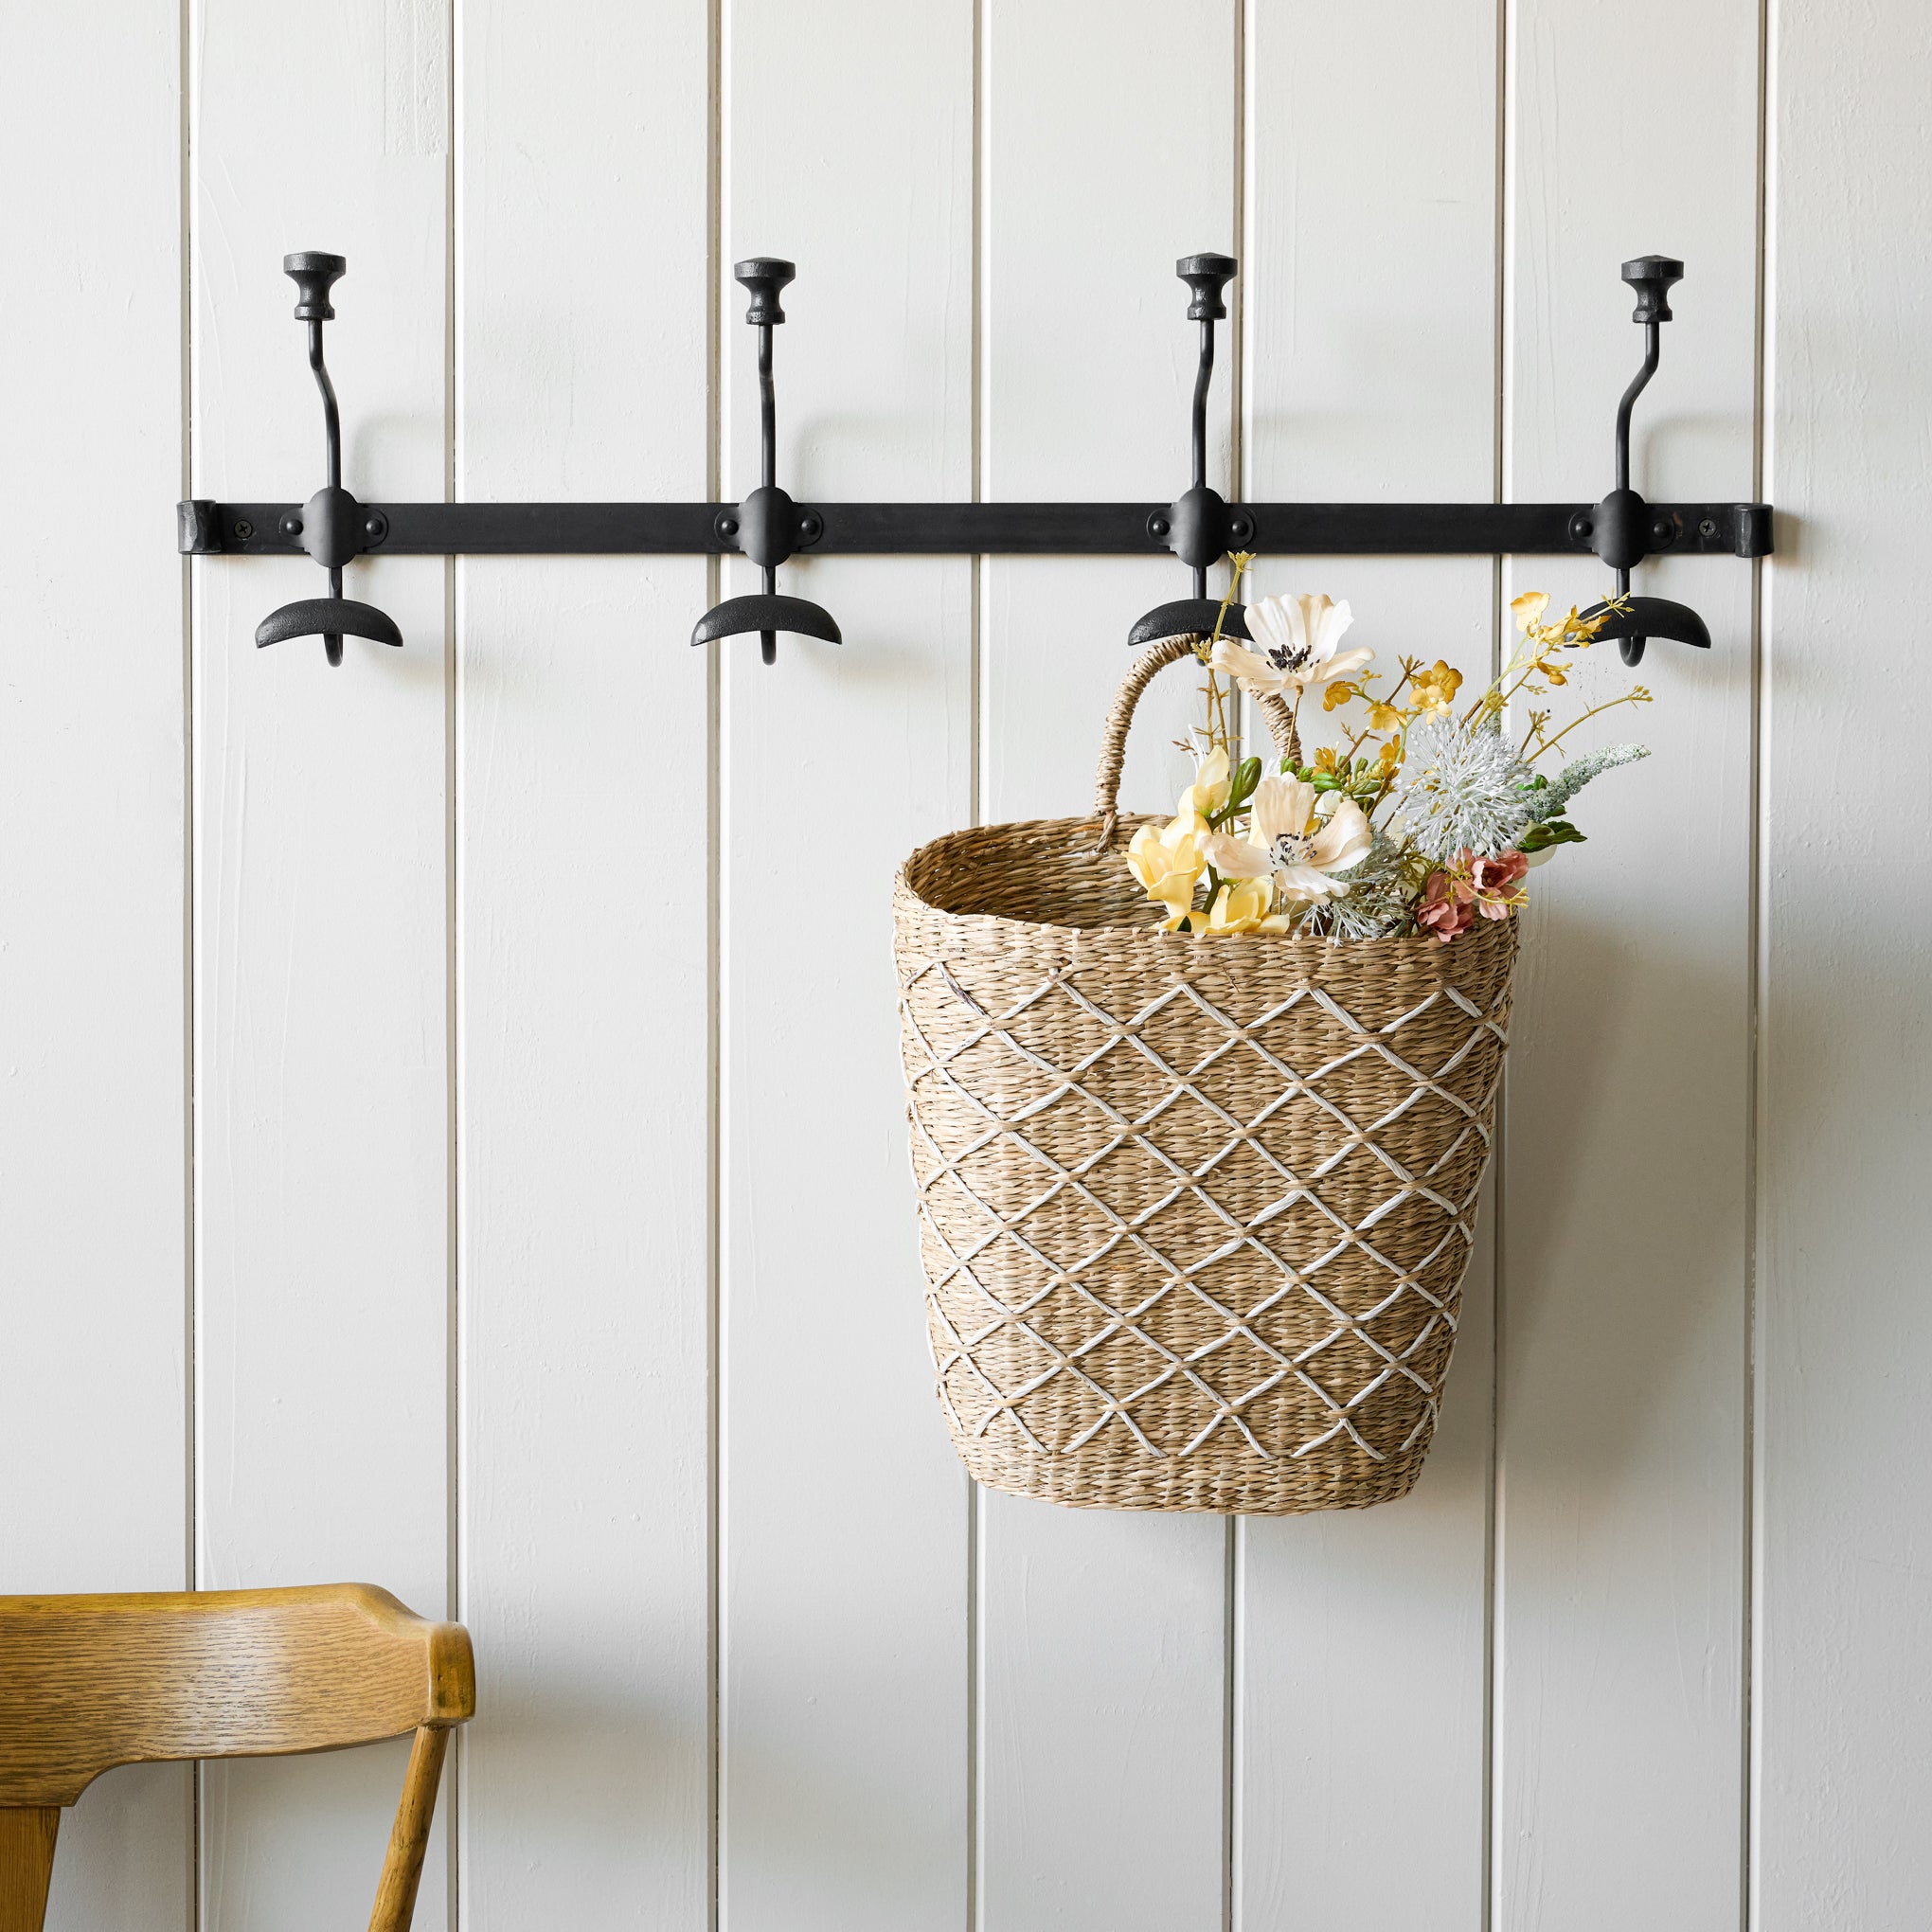 Long duke metal wall hook pictured with wicker basket hanging from one hook. Items range from $20.00 to $58.00